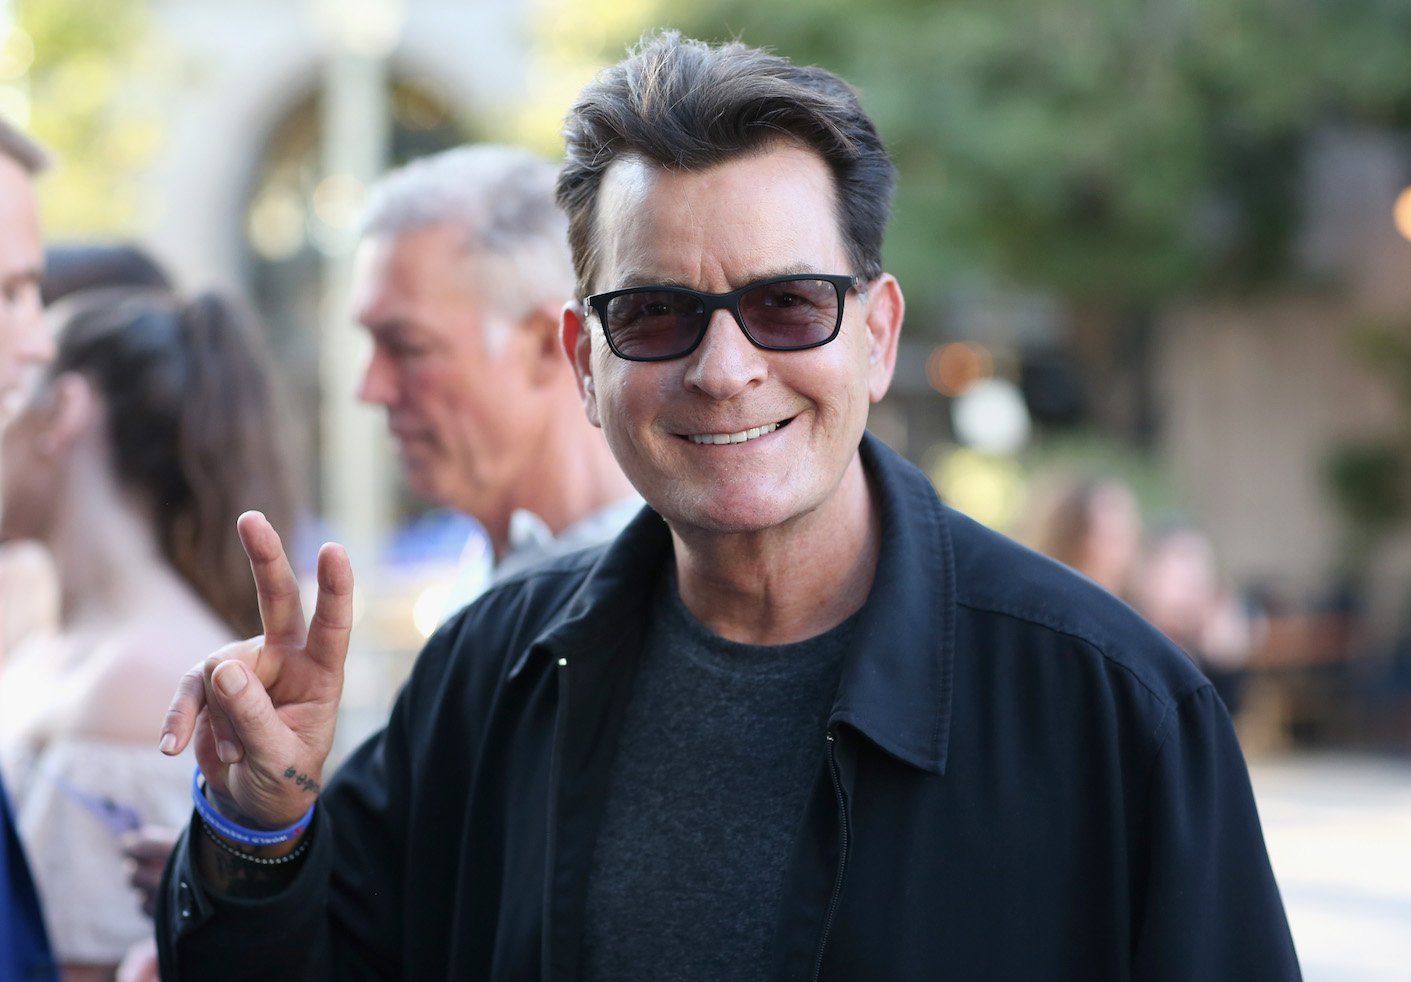 What Is Charlie Sheen Doing in 2022?